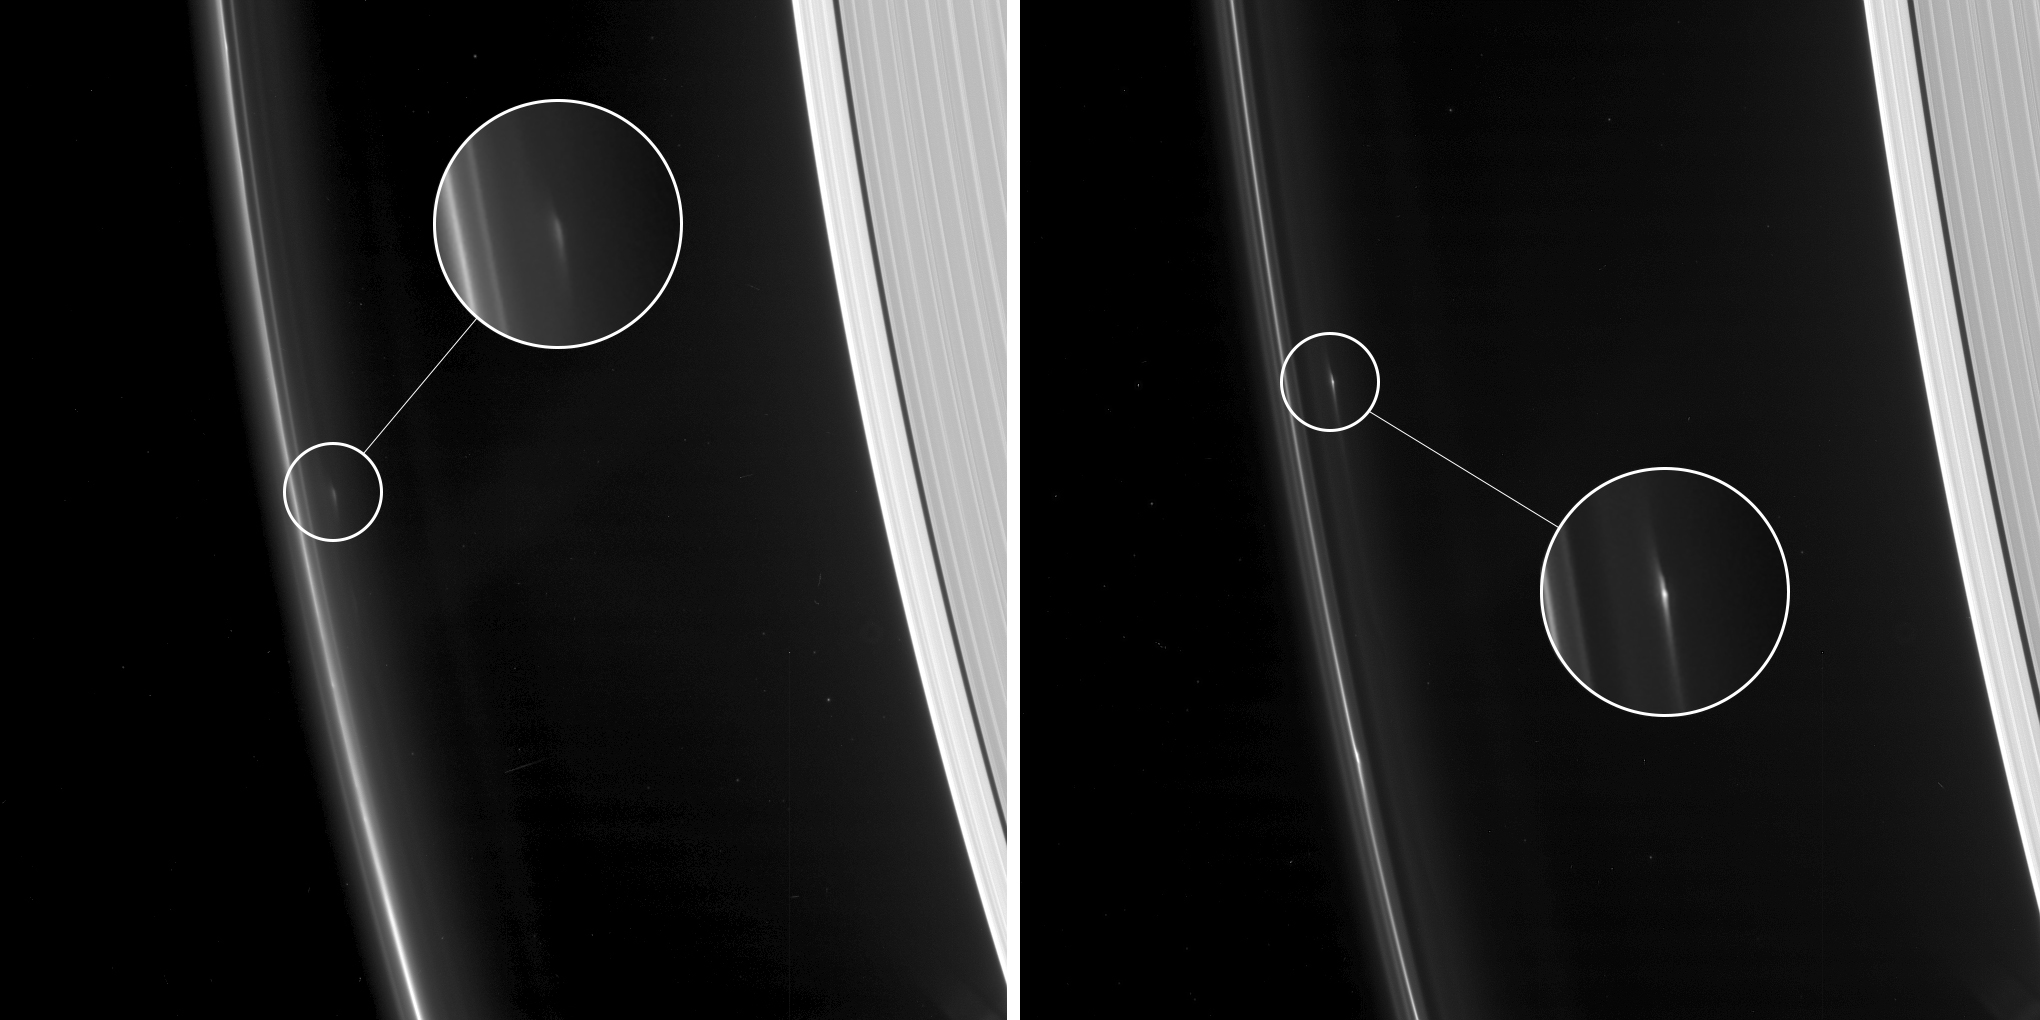 Objects in Saturn's F rings (annotated)